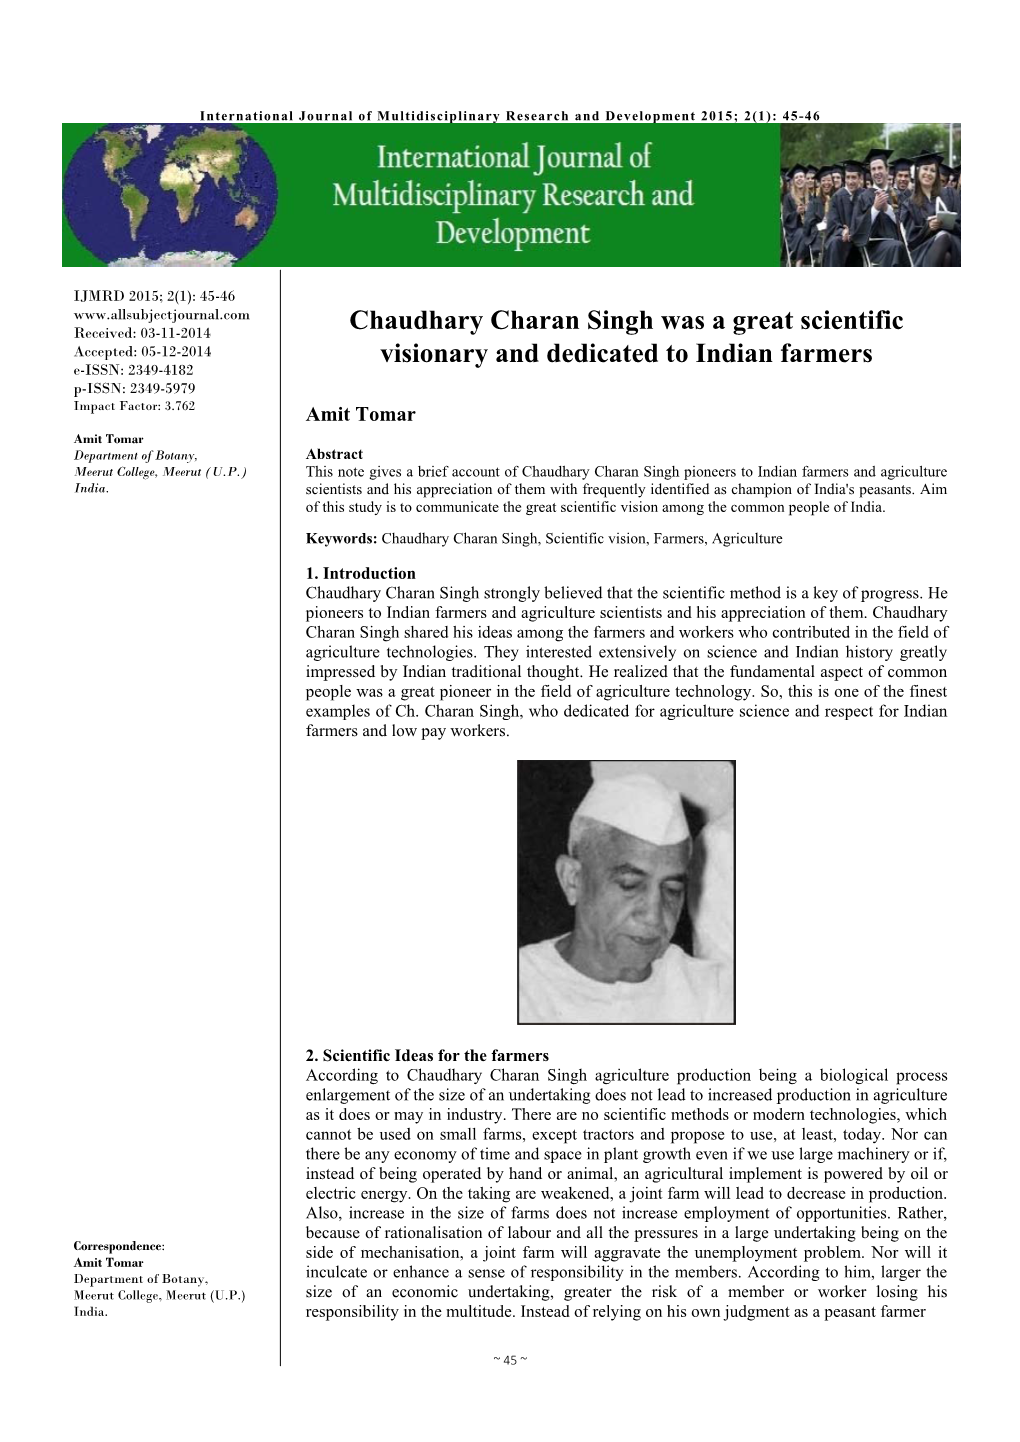 Chaudhary Charan Singh Was a Great Scientific Visionary and Dedicated To